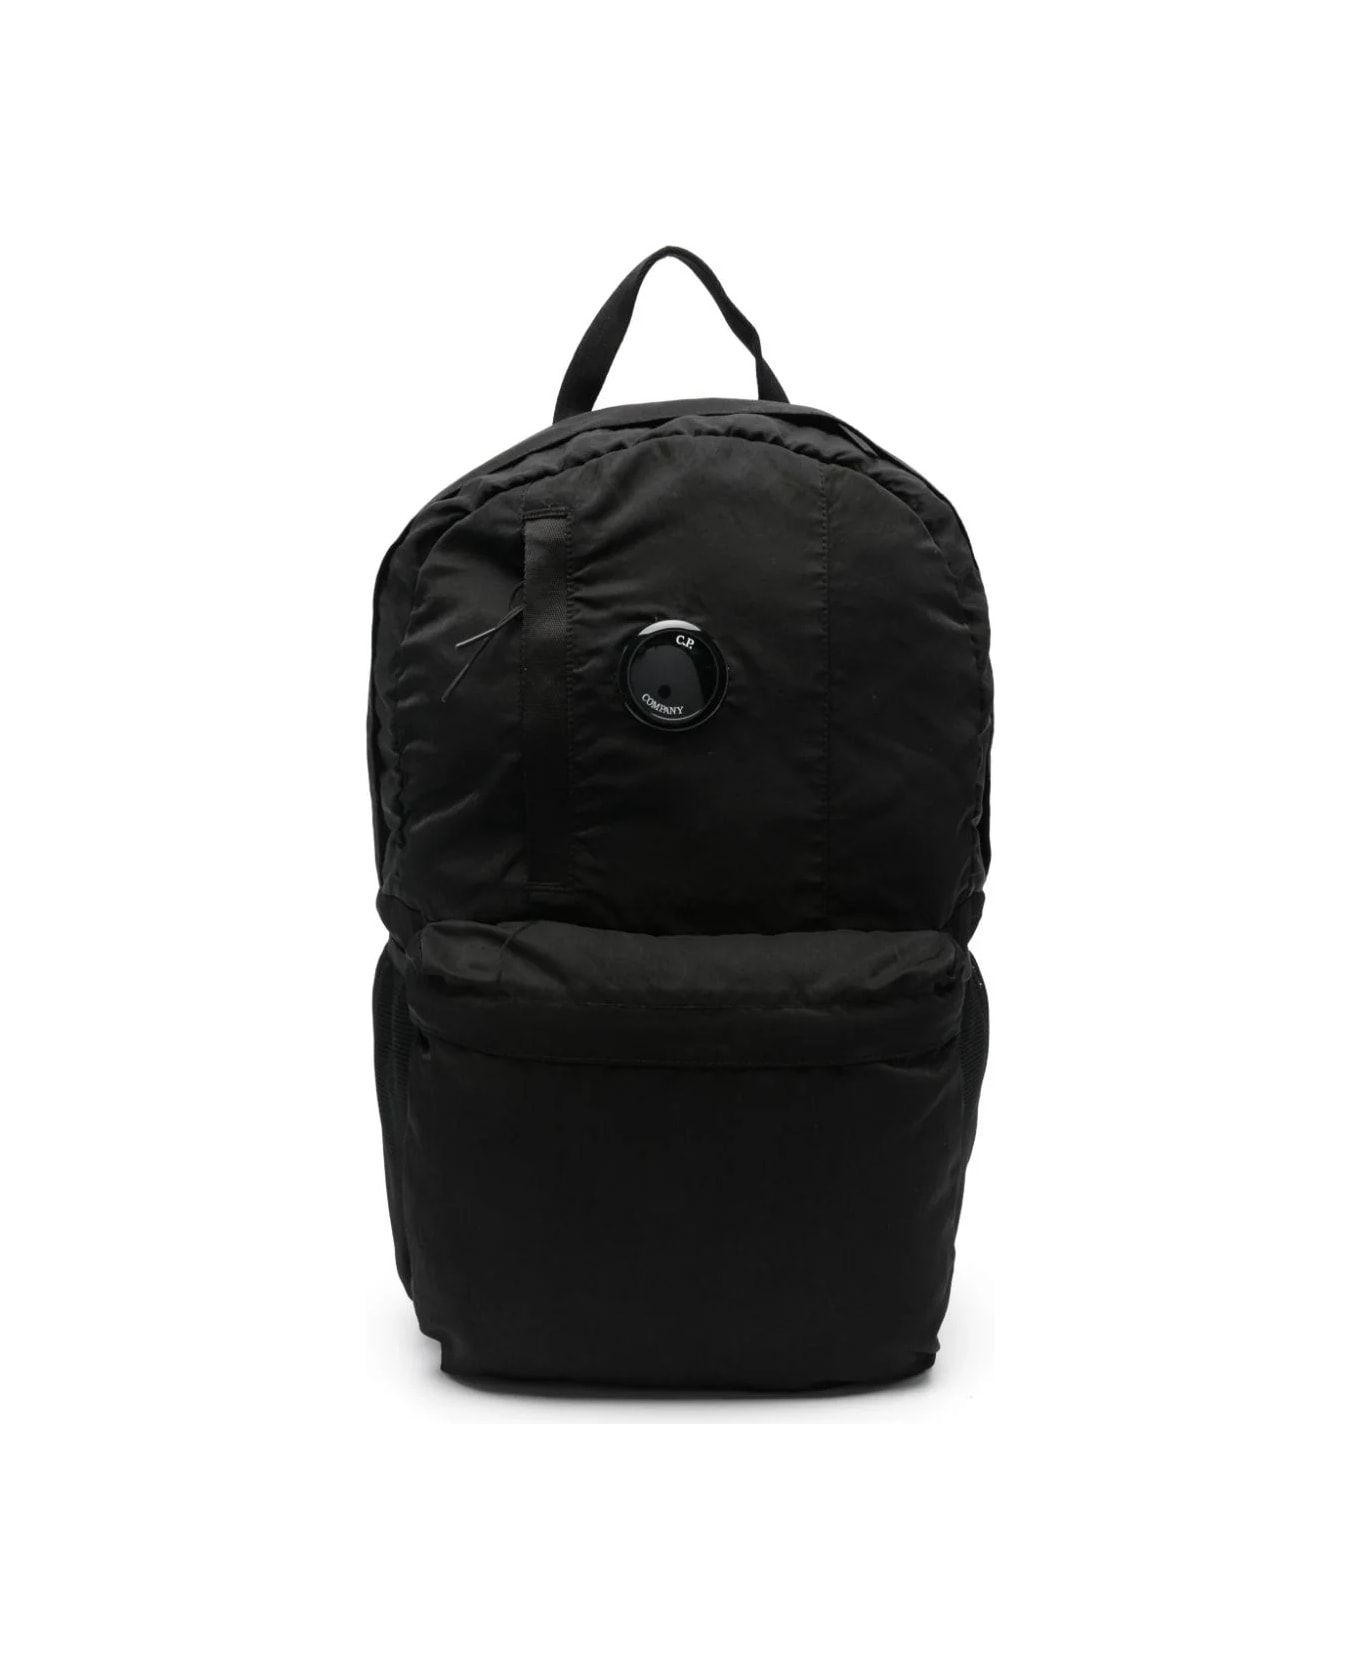 C.P. Company Undersixteen Laptop Backpack With Application - Black